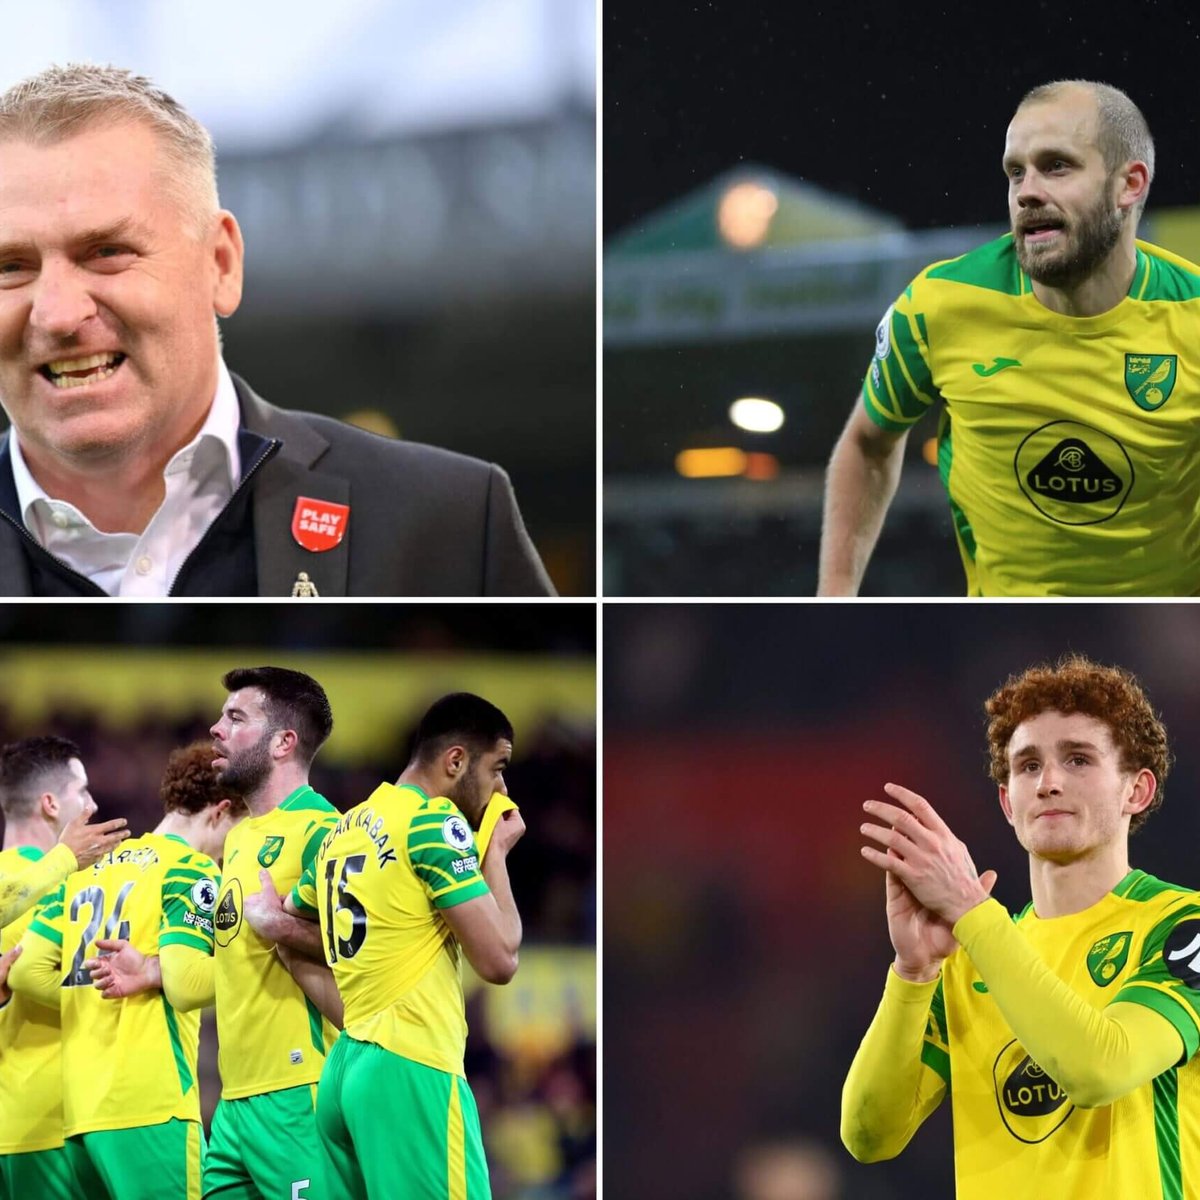 BREAKING NEWS: Norwich City Completes Signing of Promising Midfielder in Major Transfer Coup…Do you think we should sign the midfielder?